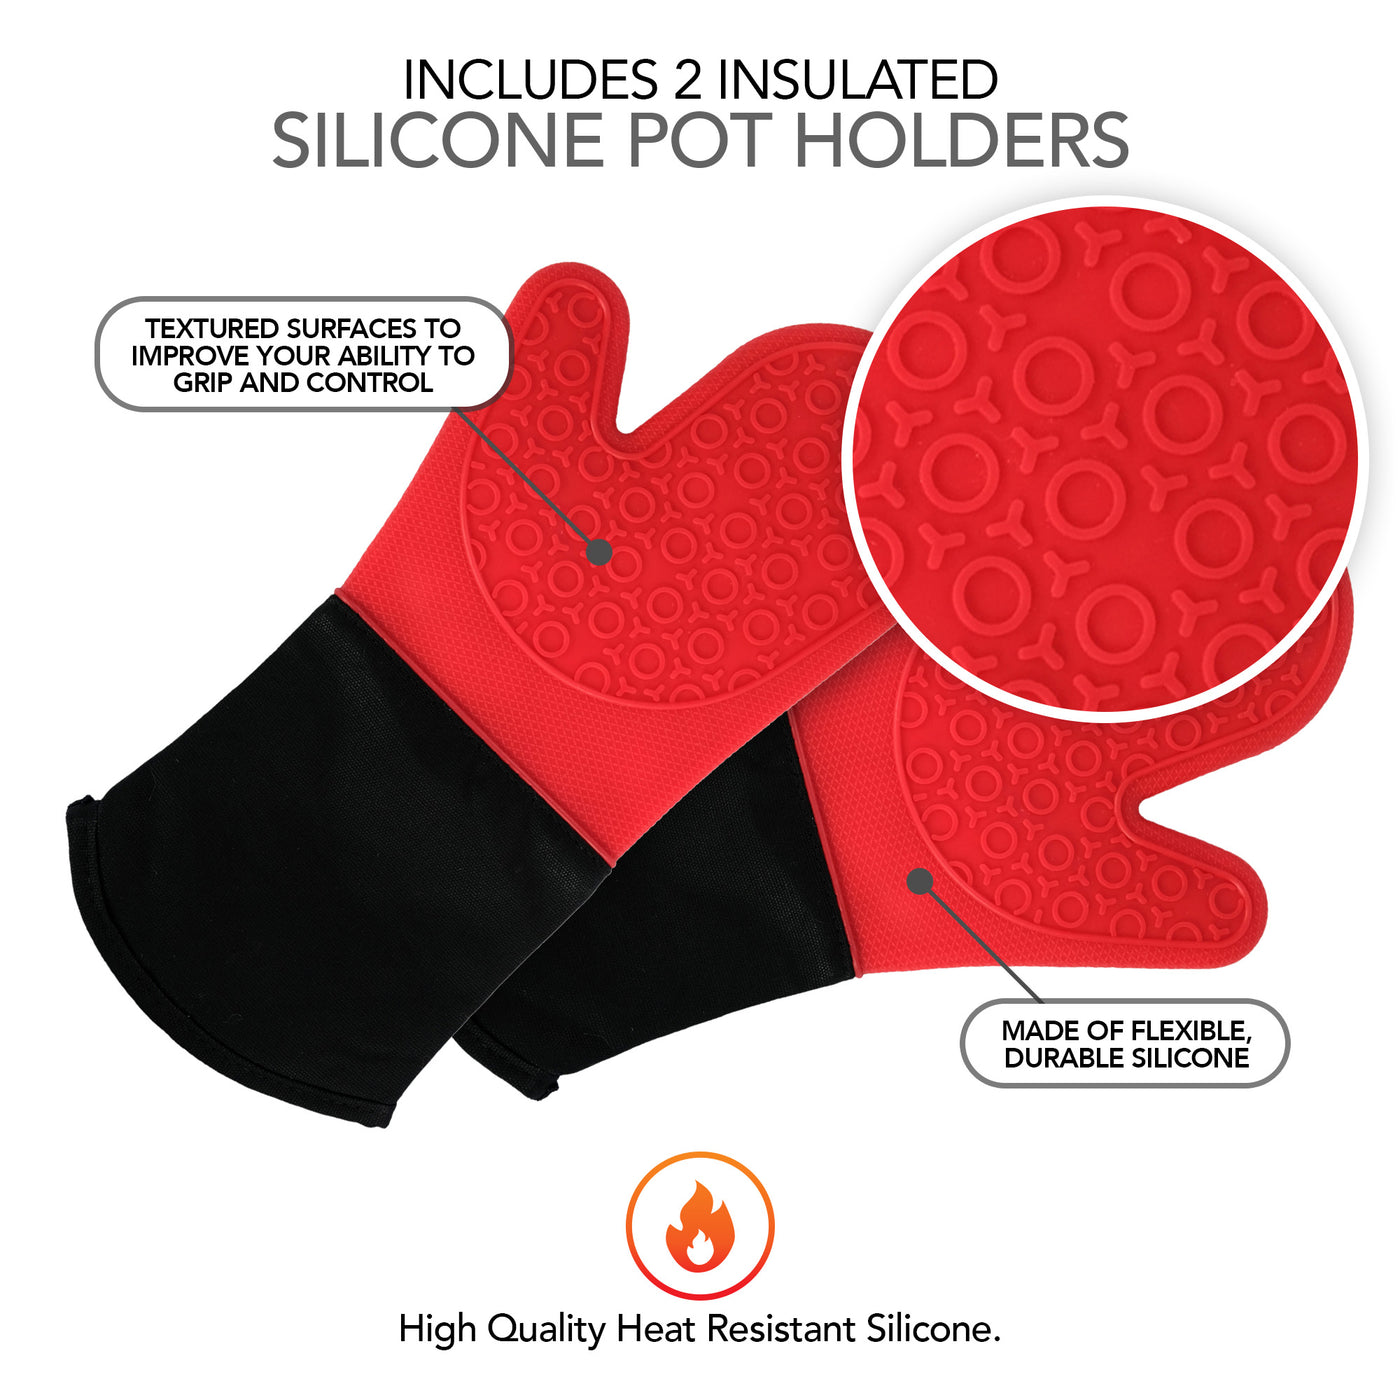 Silicone Oven Mitts and Potholders (4-Piece Set), Kitchen Counter - Advanced Heat Resistant Pot Holders, Non-Slip Textured Grip Oven Mitt - Red